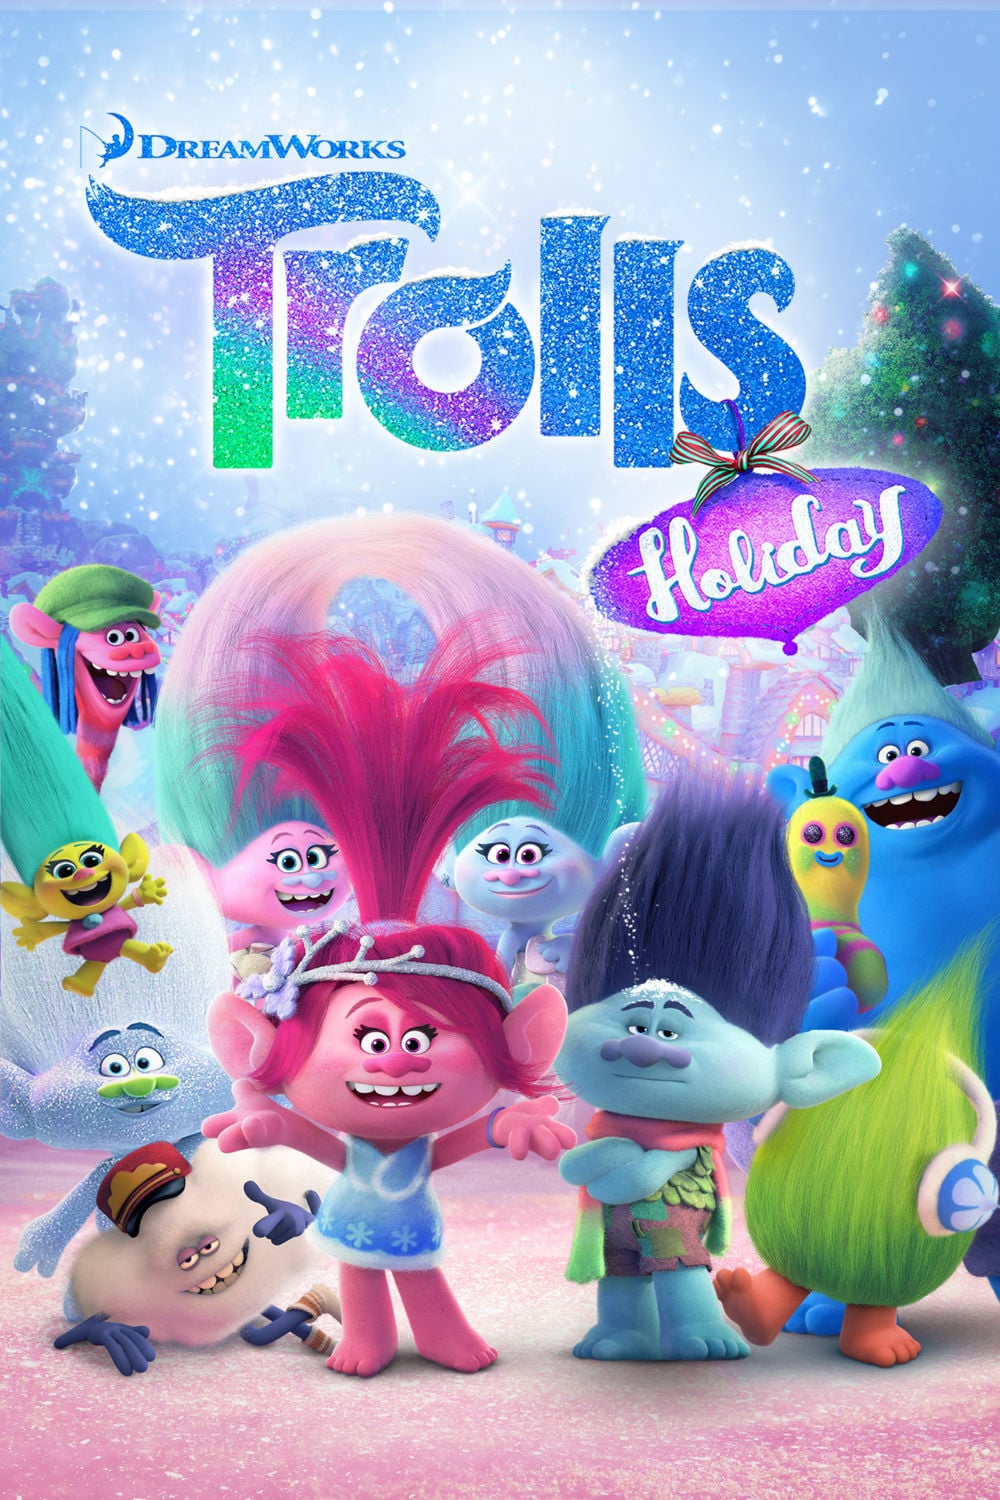 Poster for the movie "Trolls Holiday"